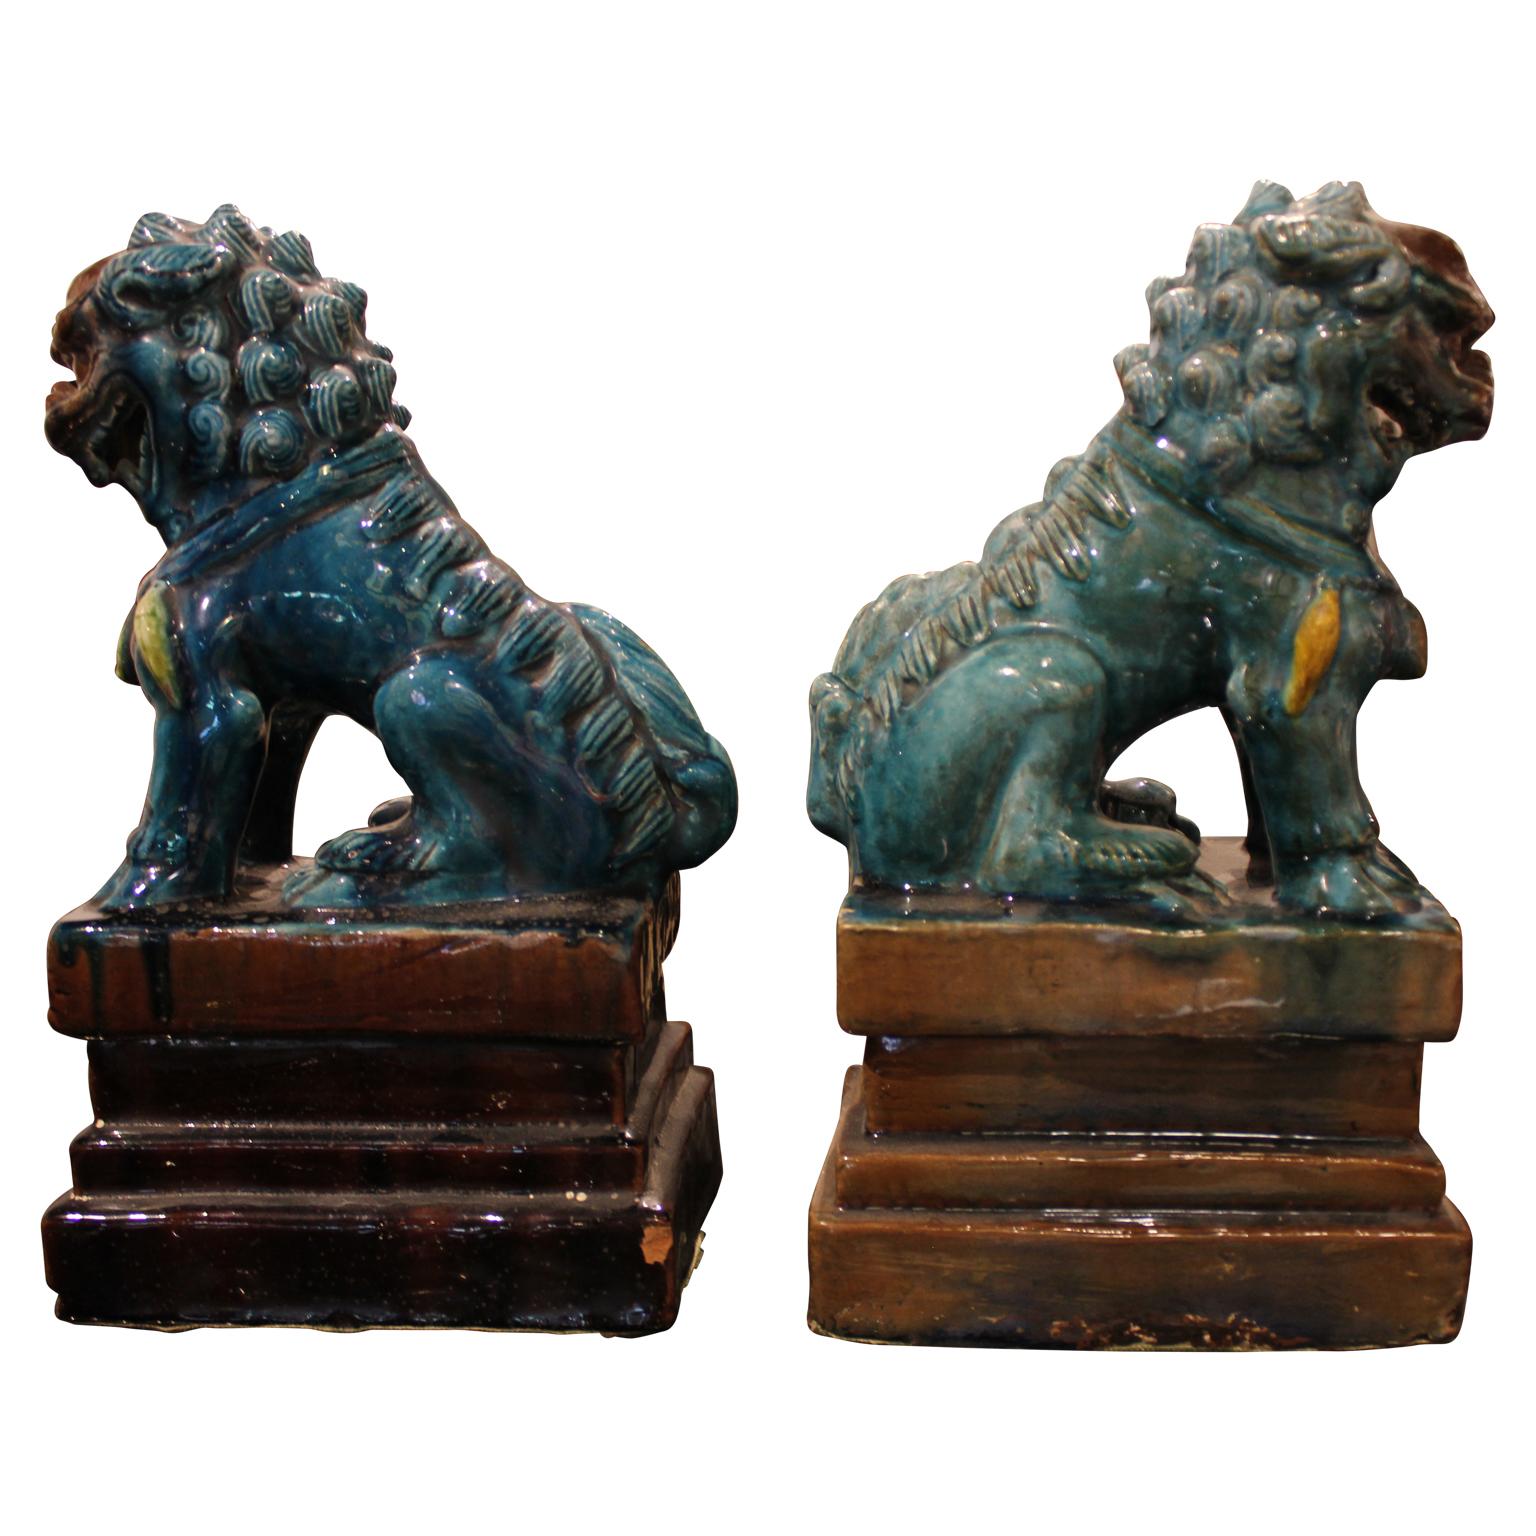 Set of beautiful ceramic foo dog bookends glazed in a rich turquoise color.  The base is not a separate piece. Sold as a set of 2.  